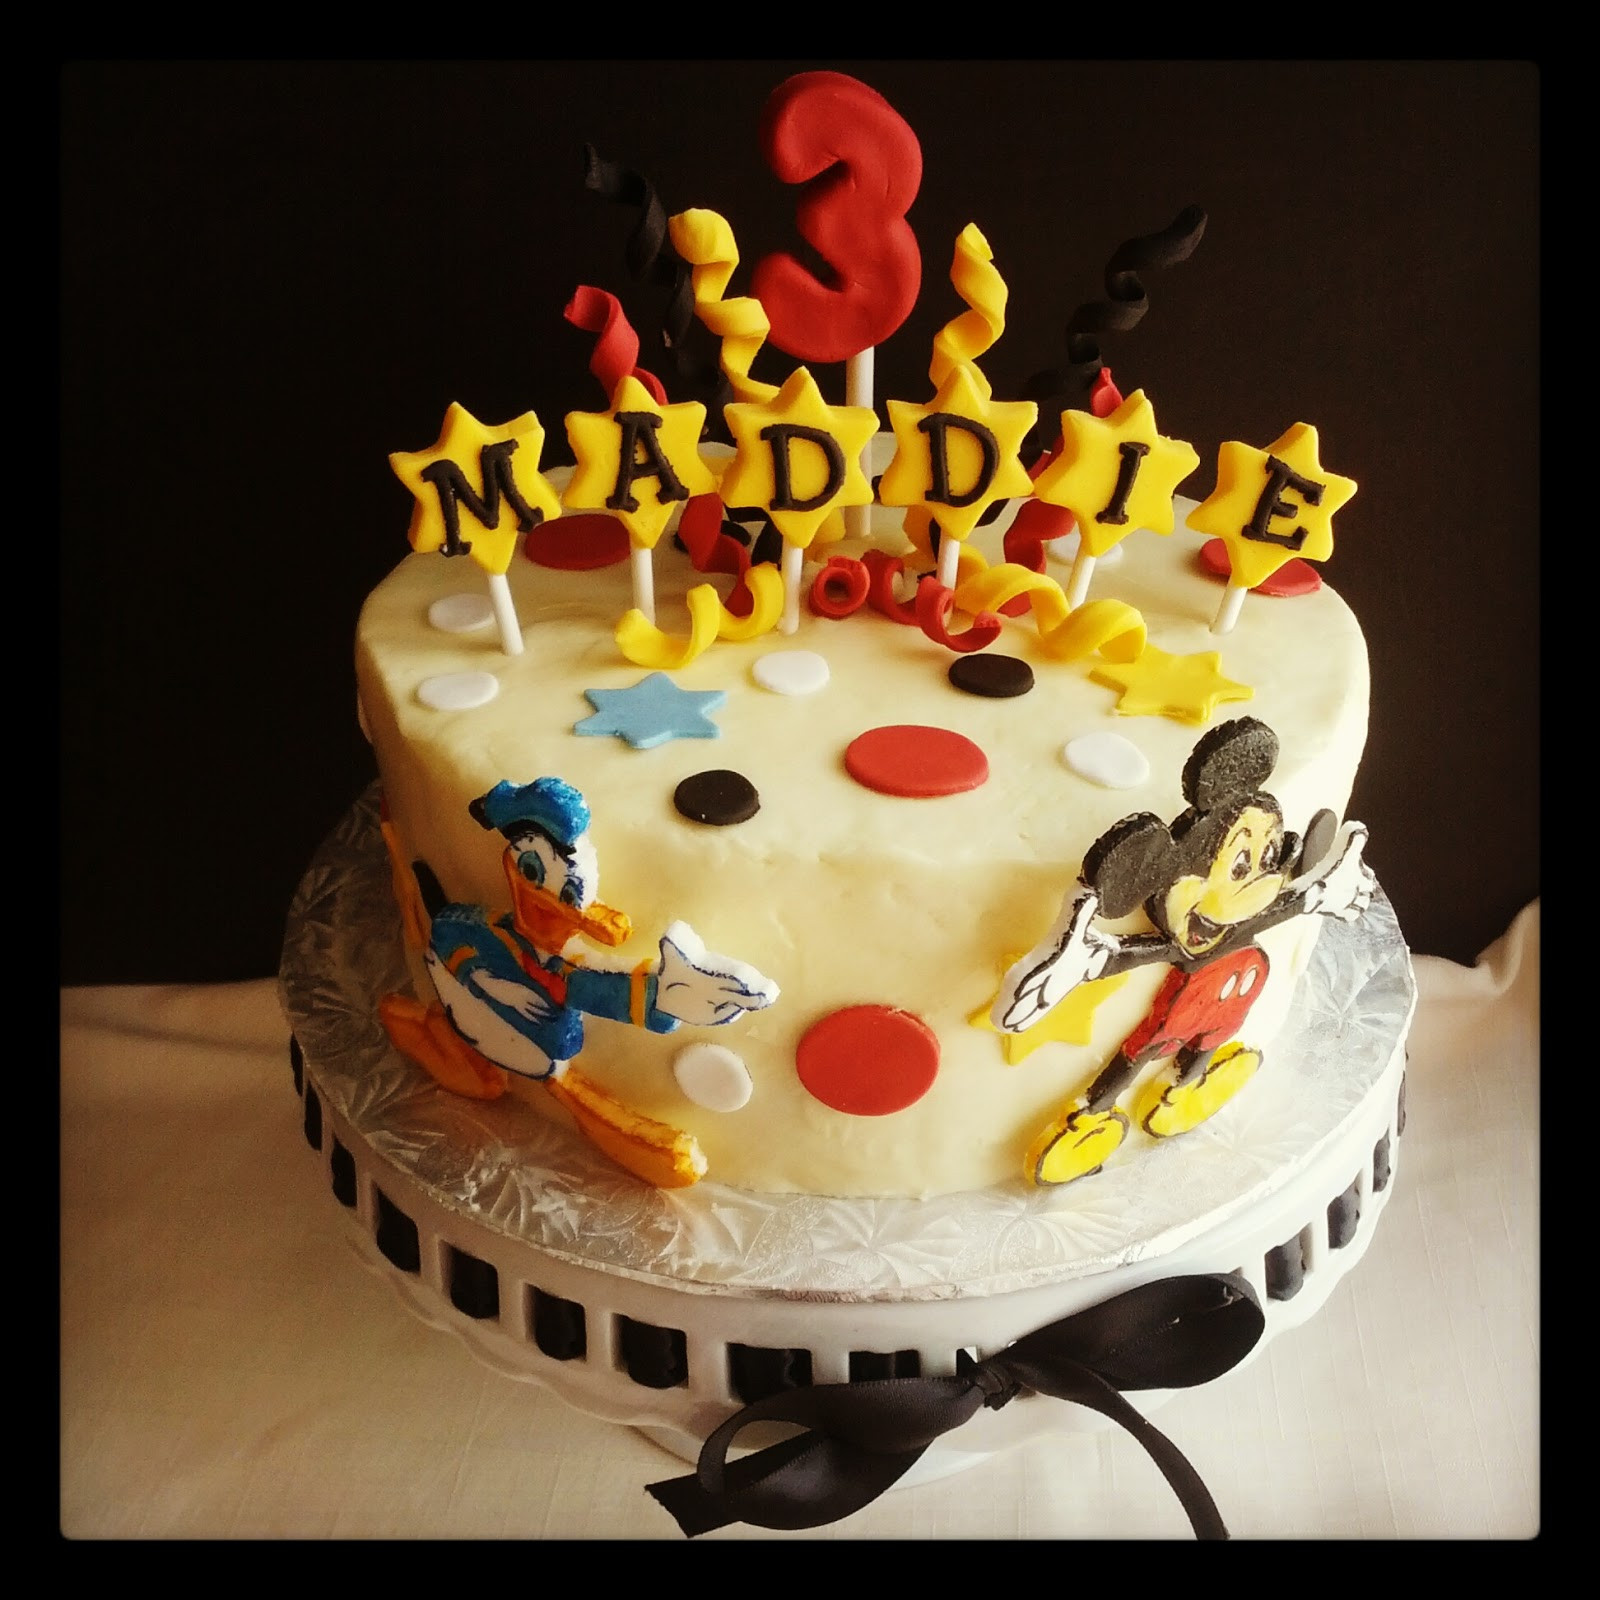 Donald Duck Birthday Cake
 Second Generation Cake Design Mickey Mouse & Donald Duck